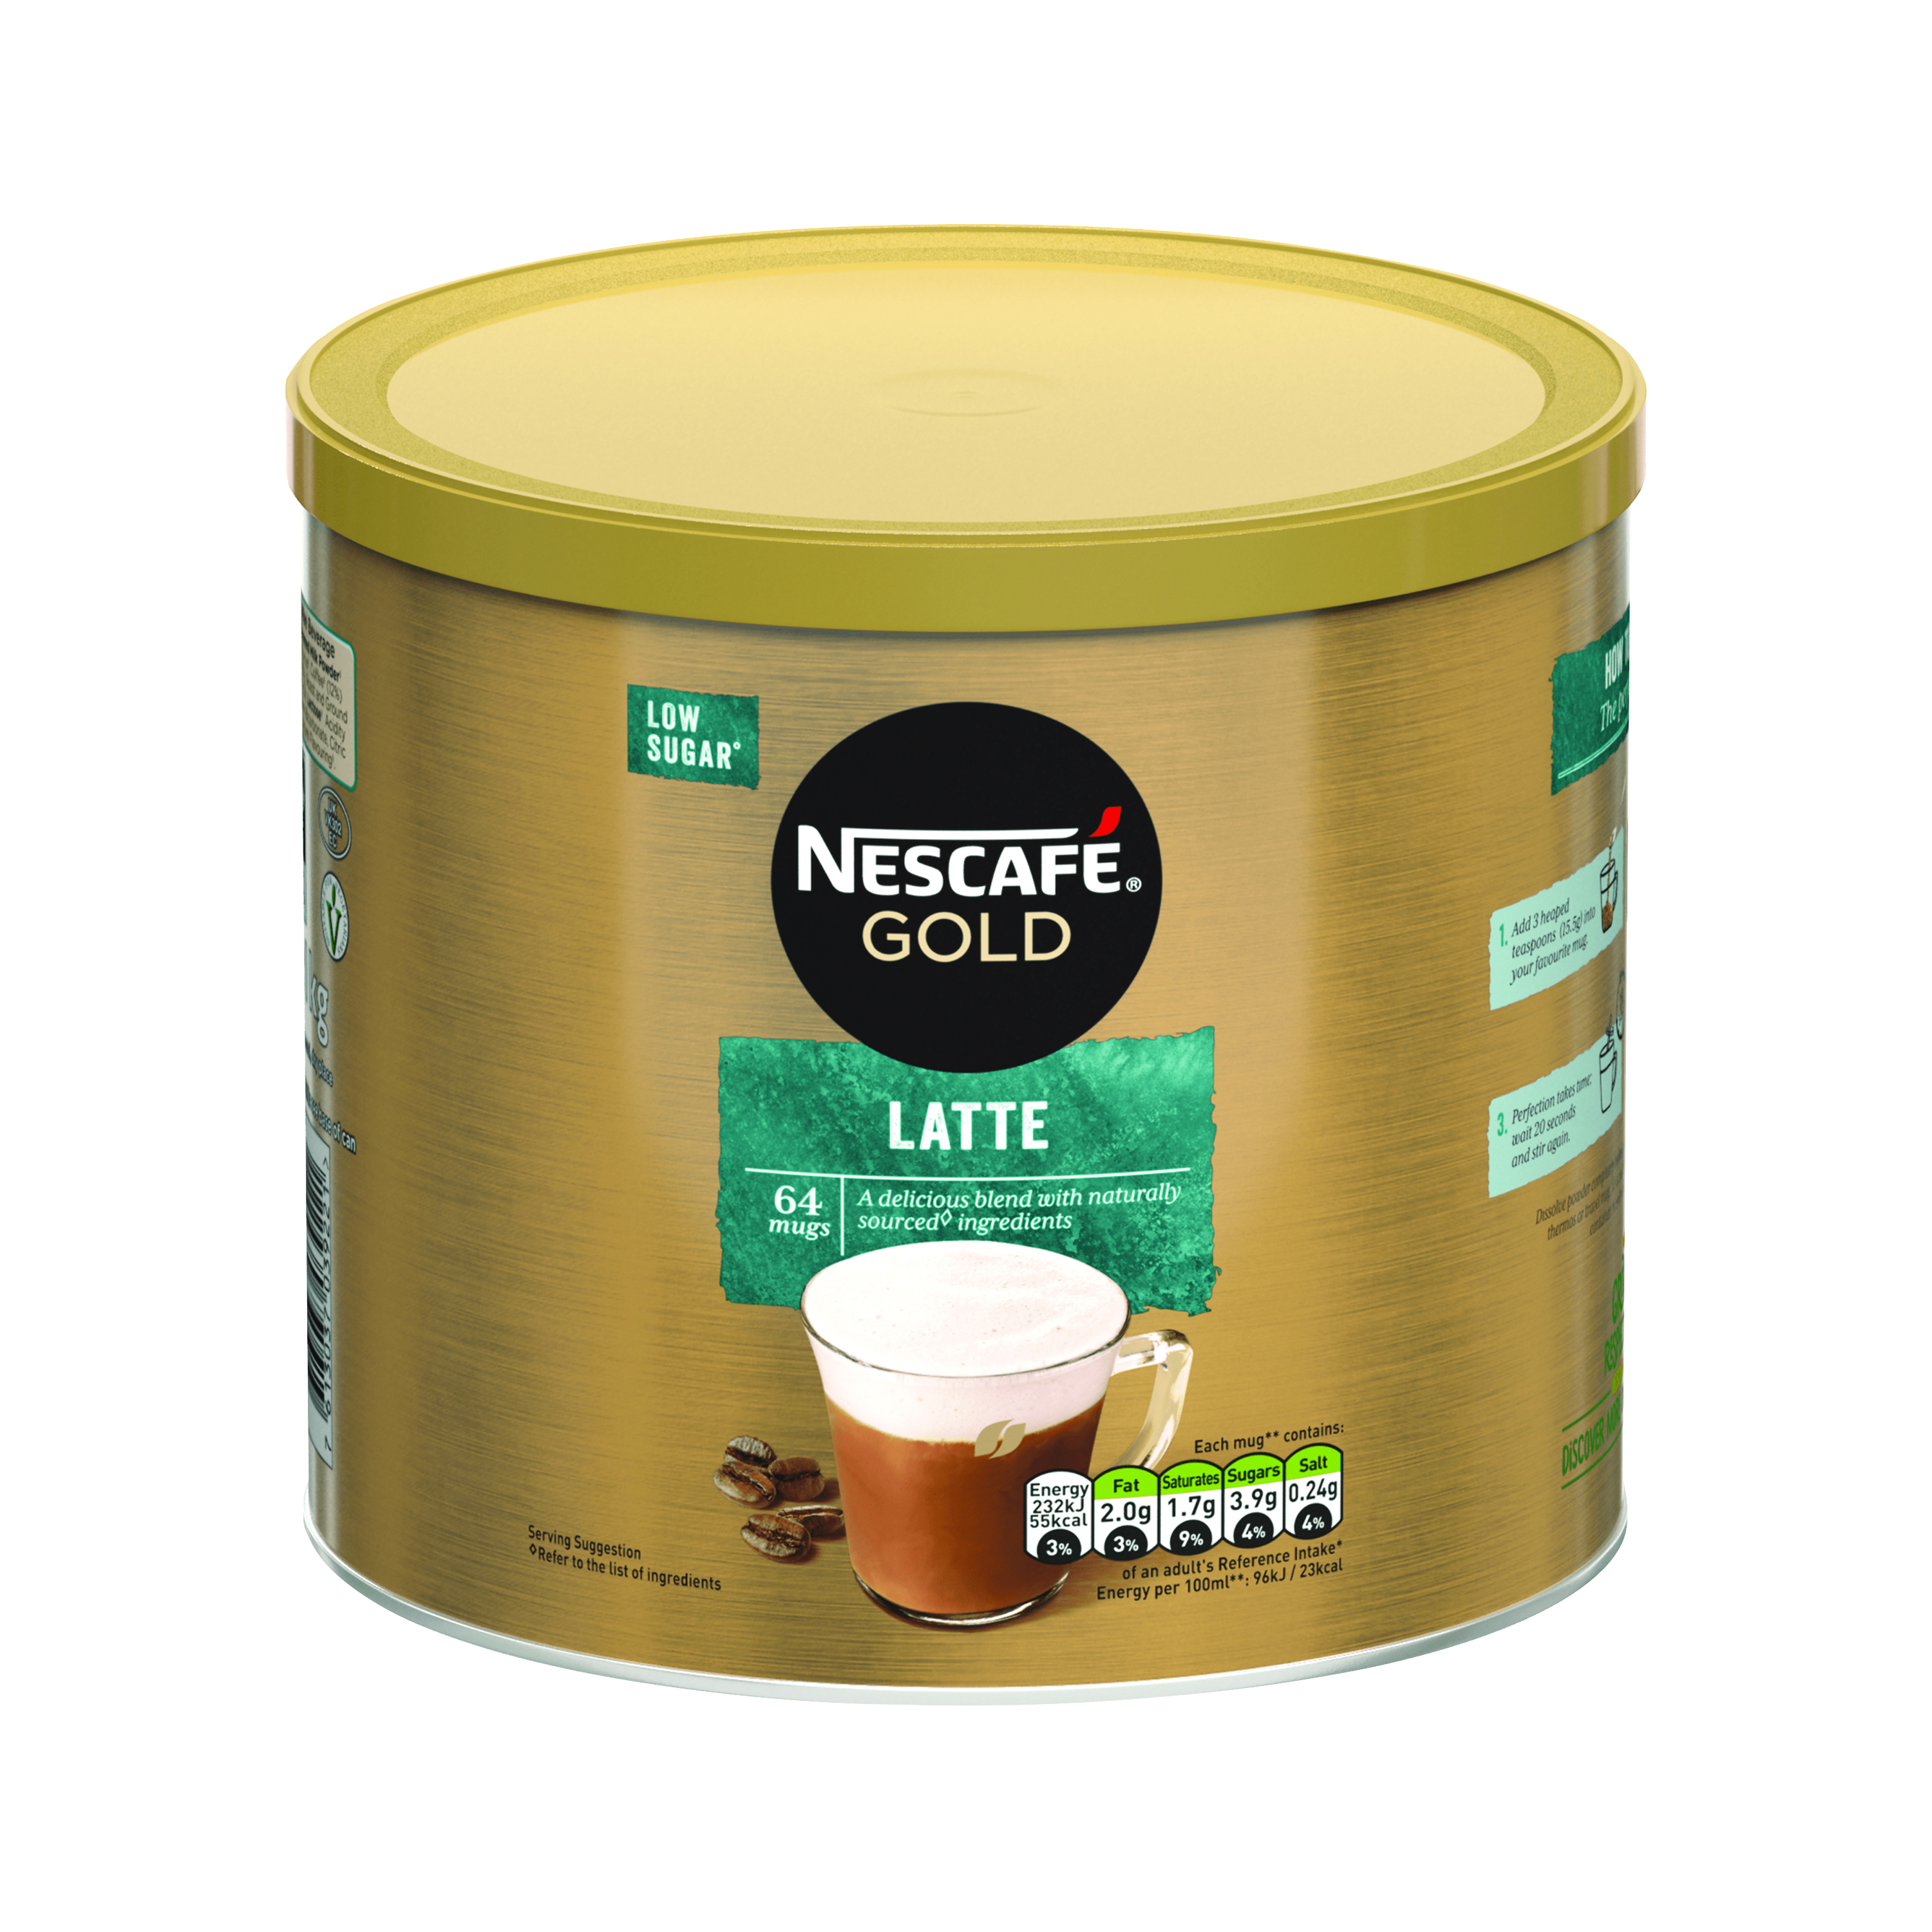 Nescafe Chococino Capsules for Dolce Gusto Machine Ref 12352725 Packed 48  (3x16 Capsules=24 Drinks)